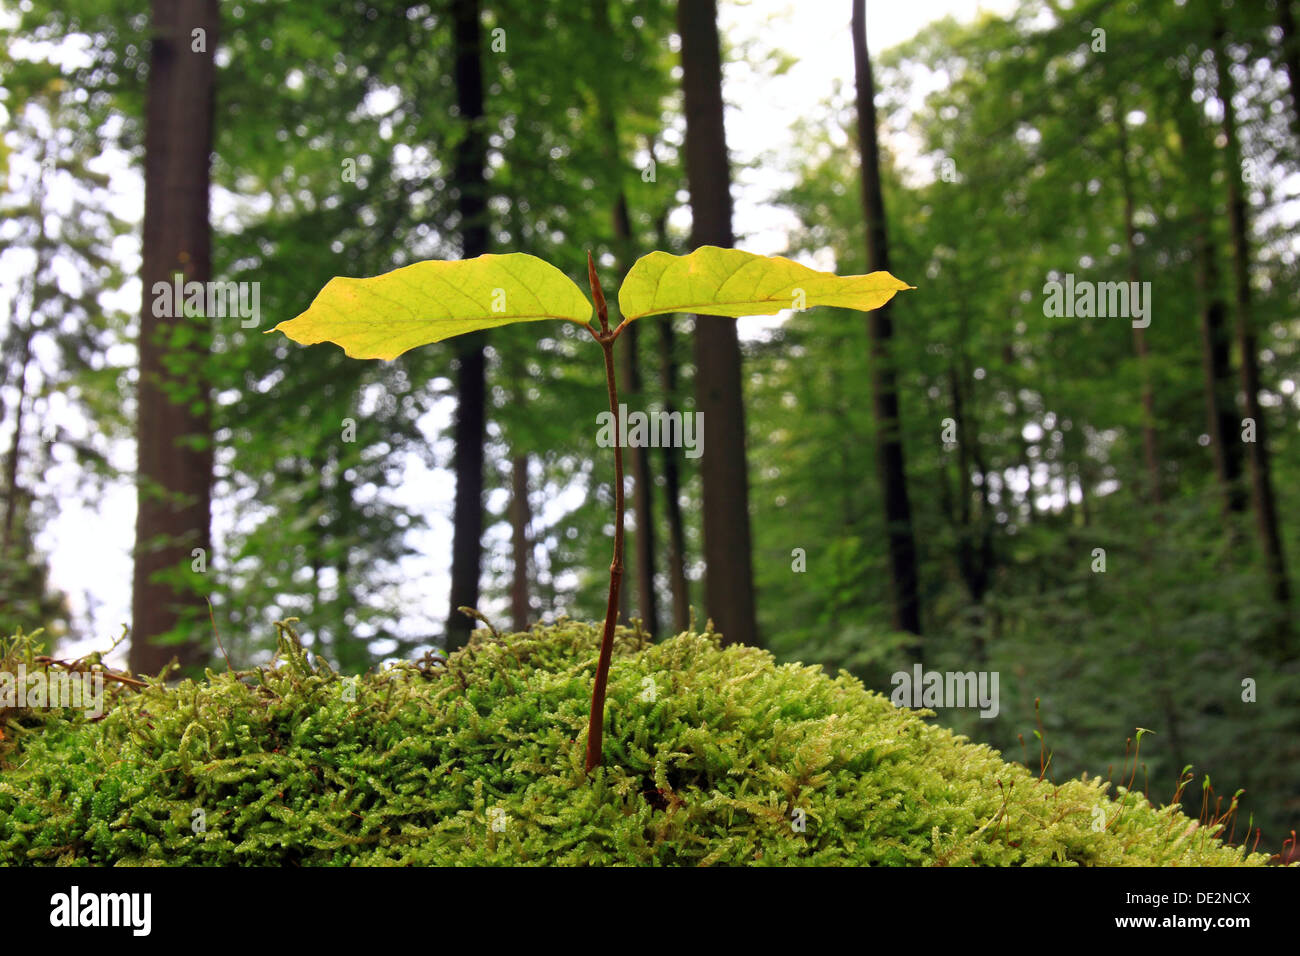 Beech seedling growing on moss, symbolic image for natural forest, natural forest management, natural regeneration Stock Photo